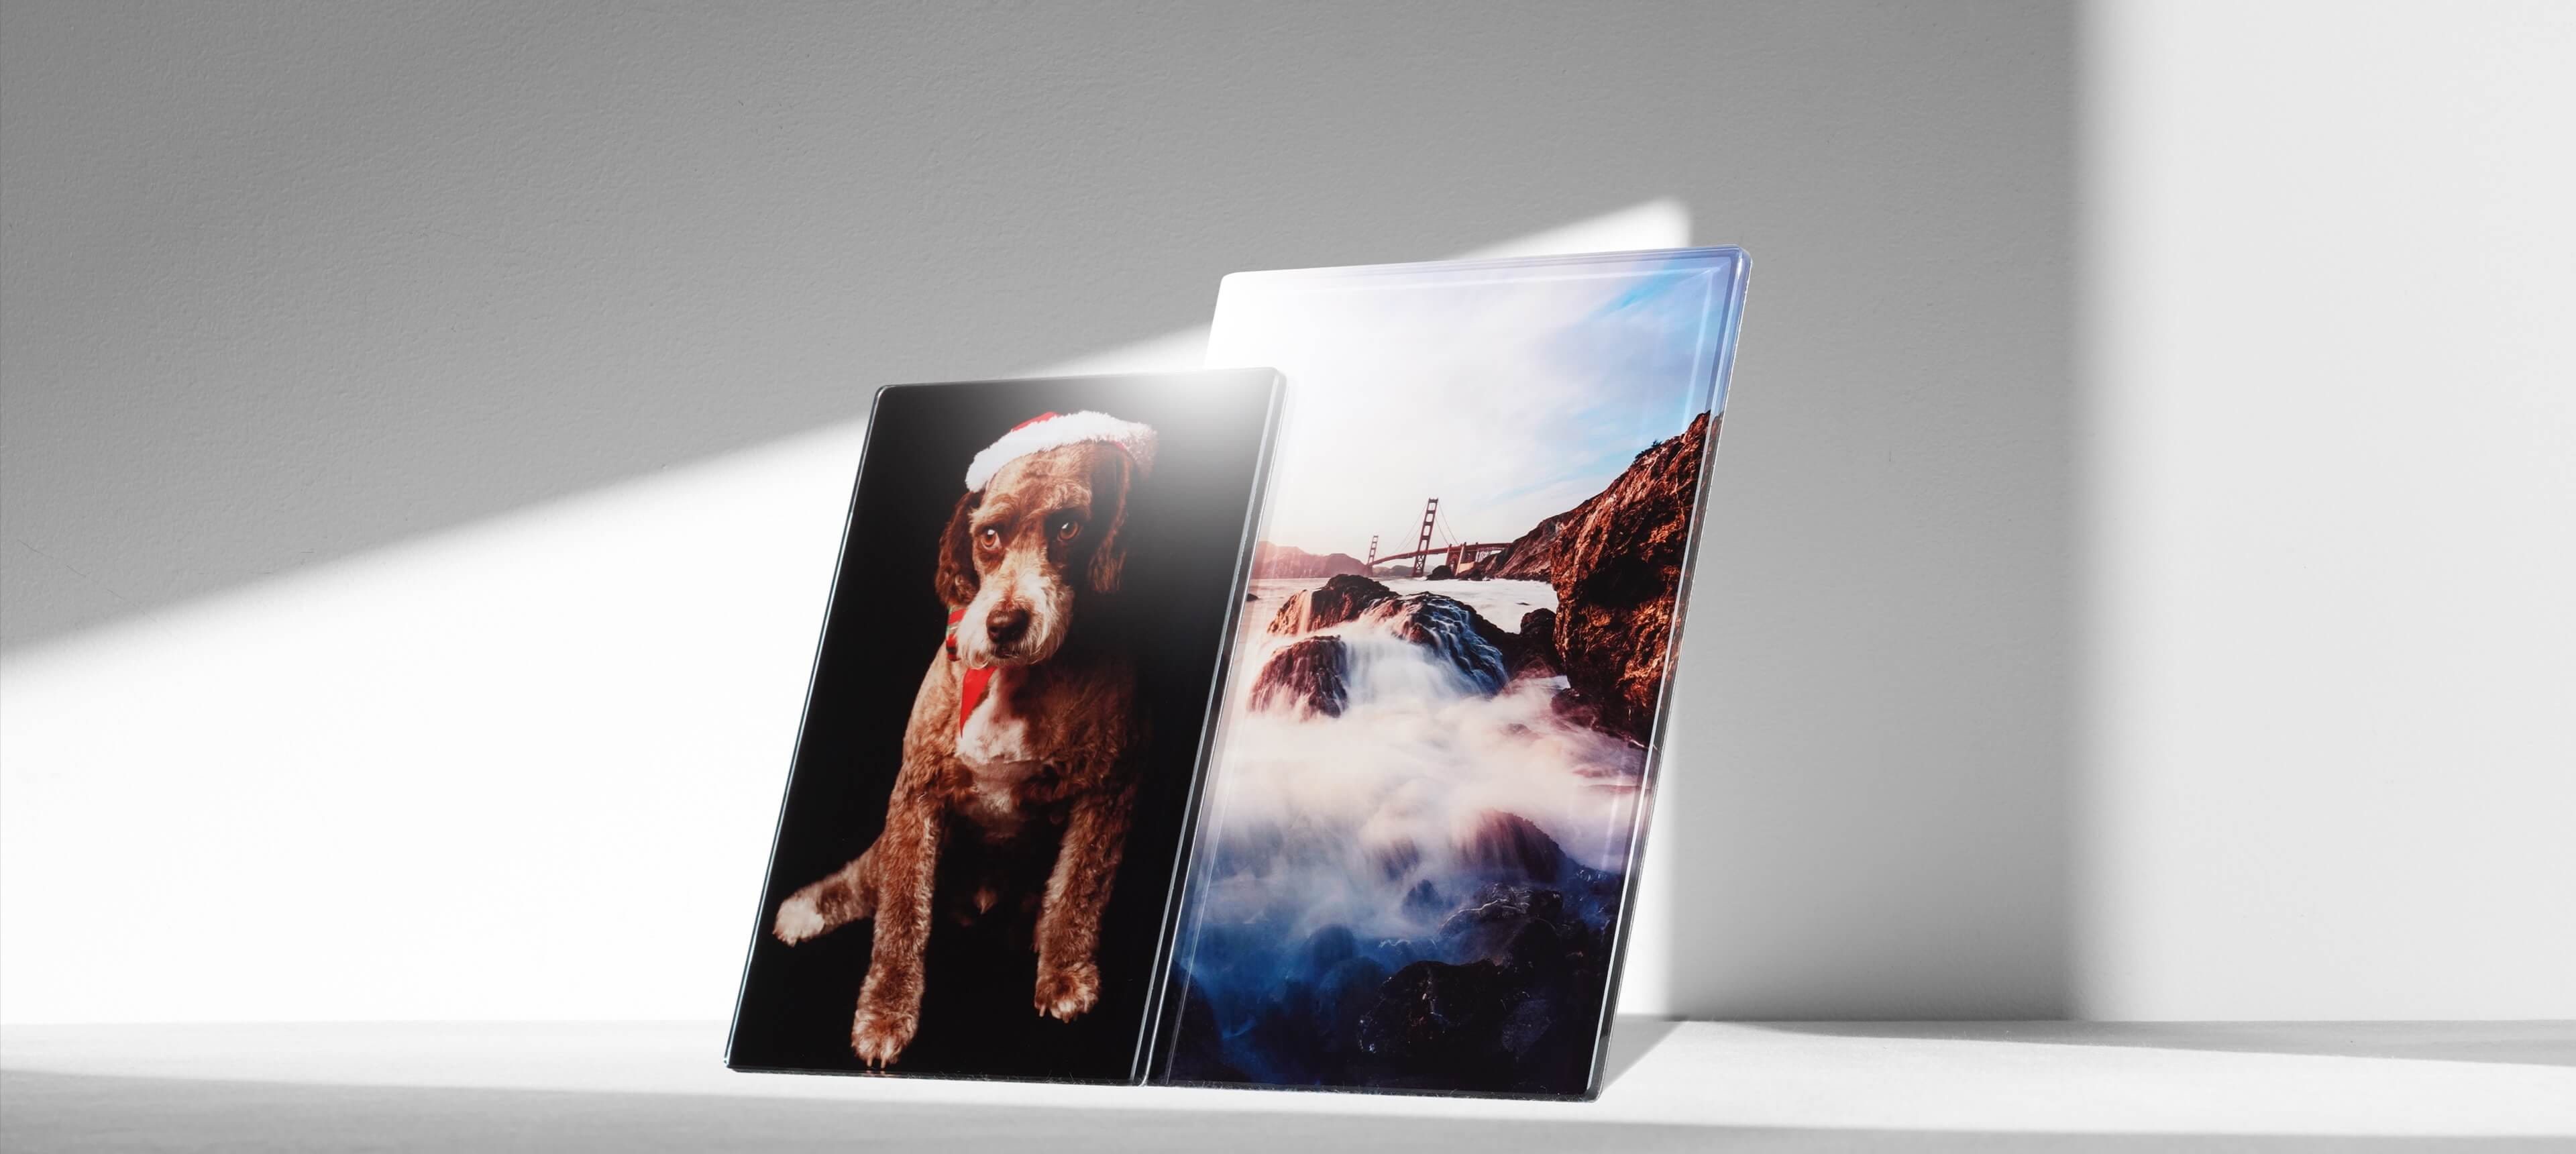 two crystal photo plaques stands on white table showing a dog and a landscape